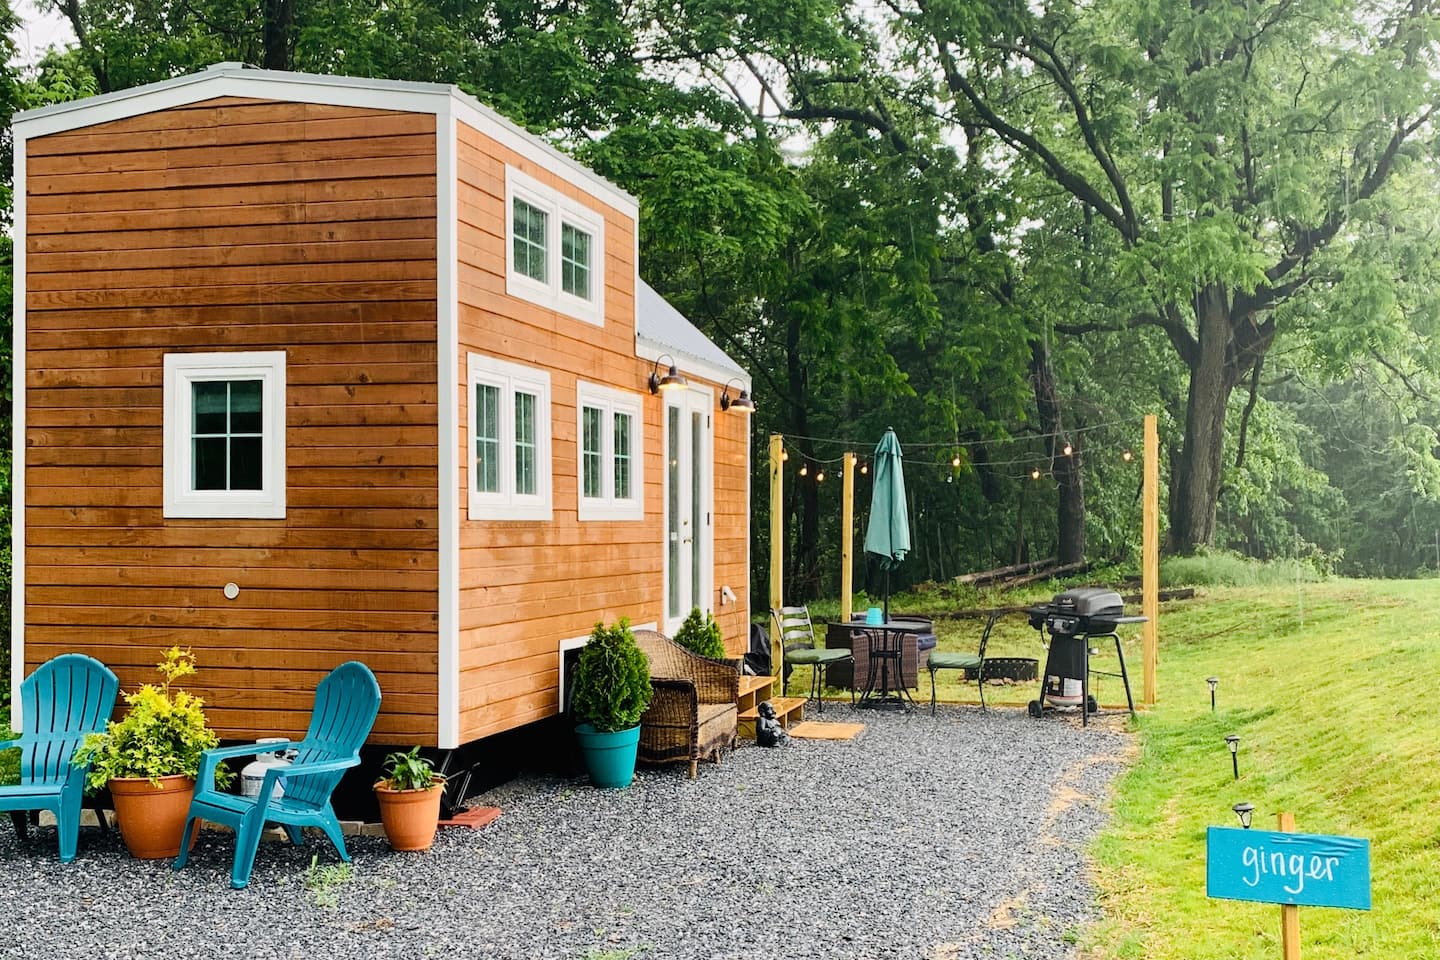 Ginger the Tiny Zen House Cabin Rental Maryland